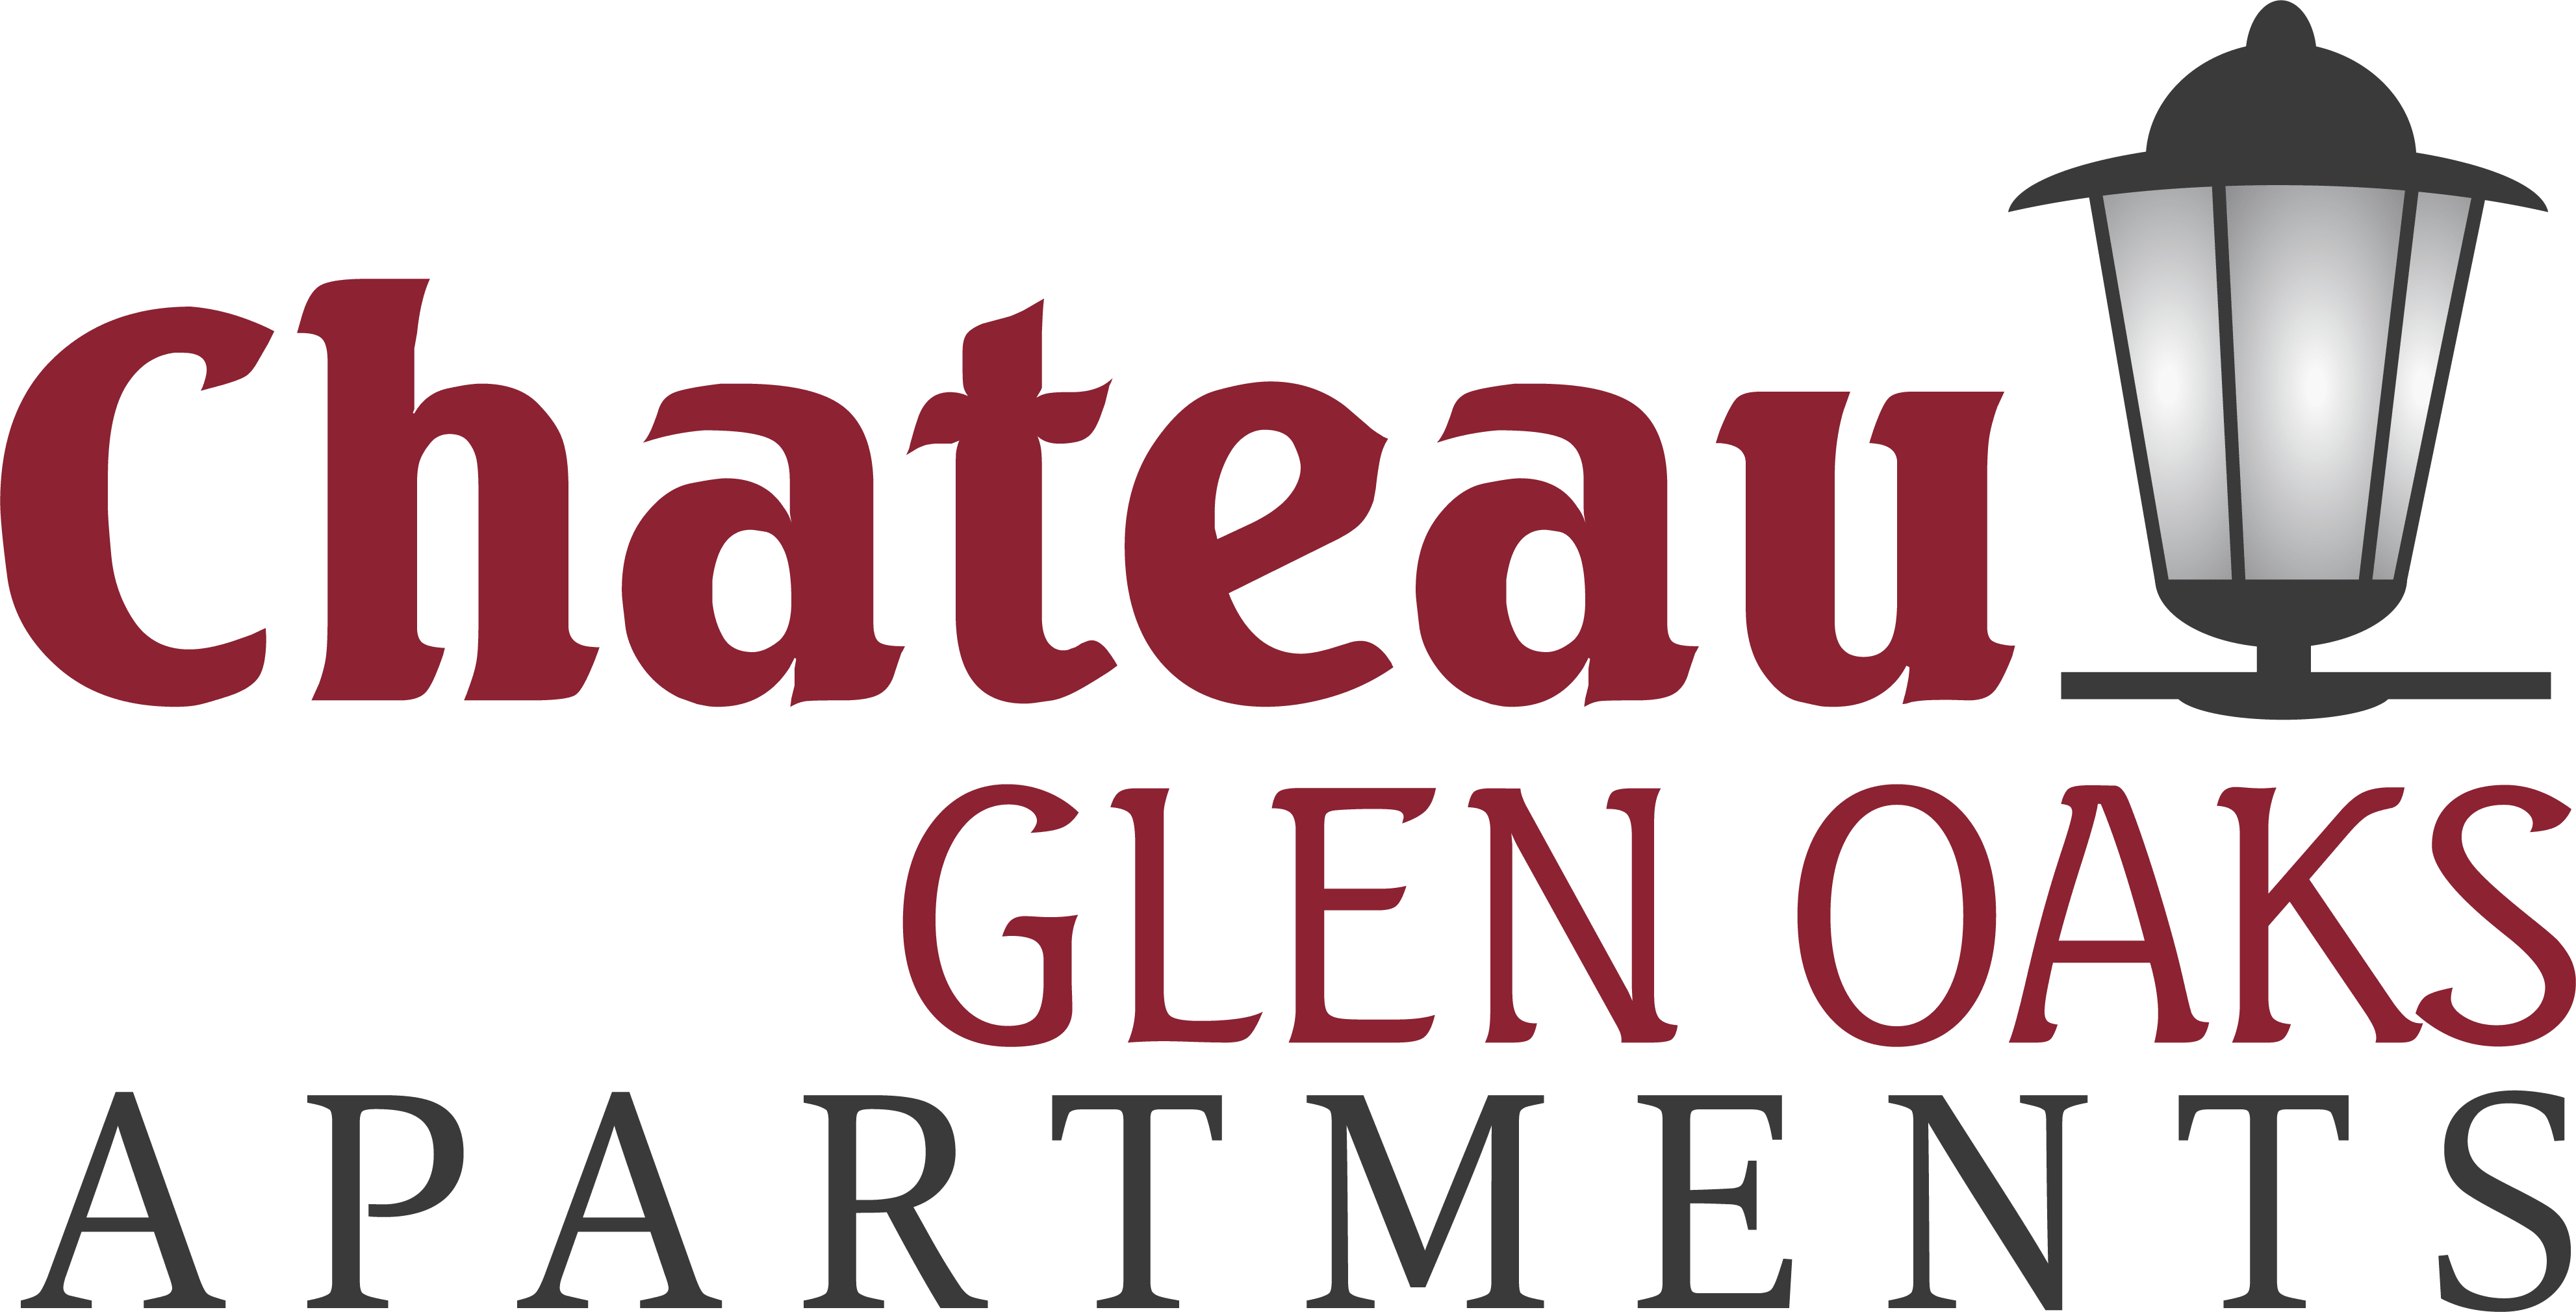 Map And Directions To Chateau Glen Oaks Apartments In Fairfield Al